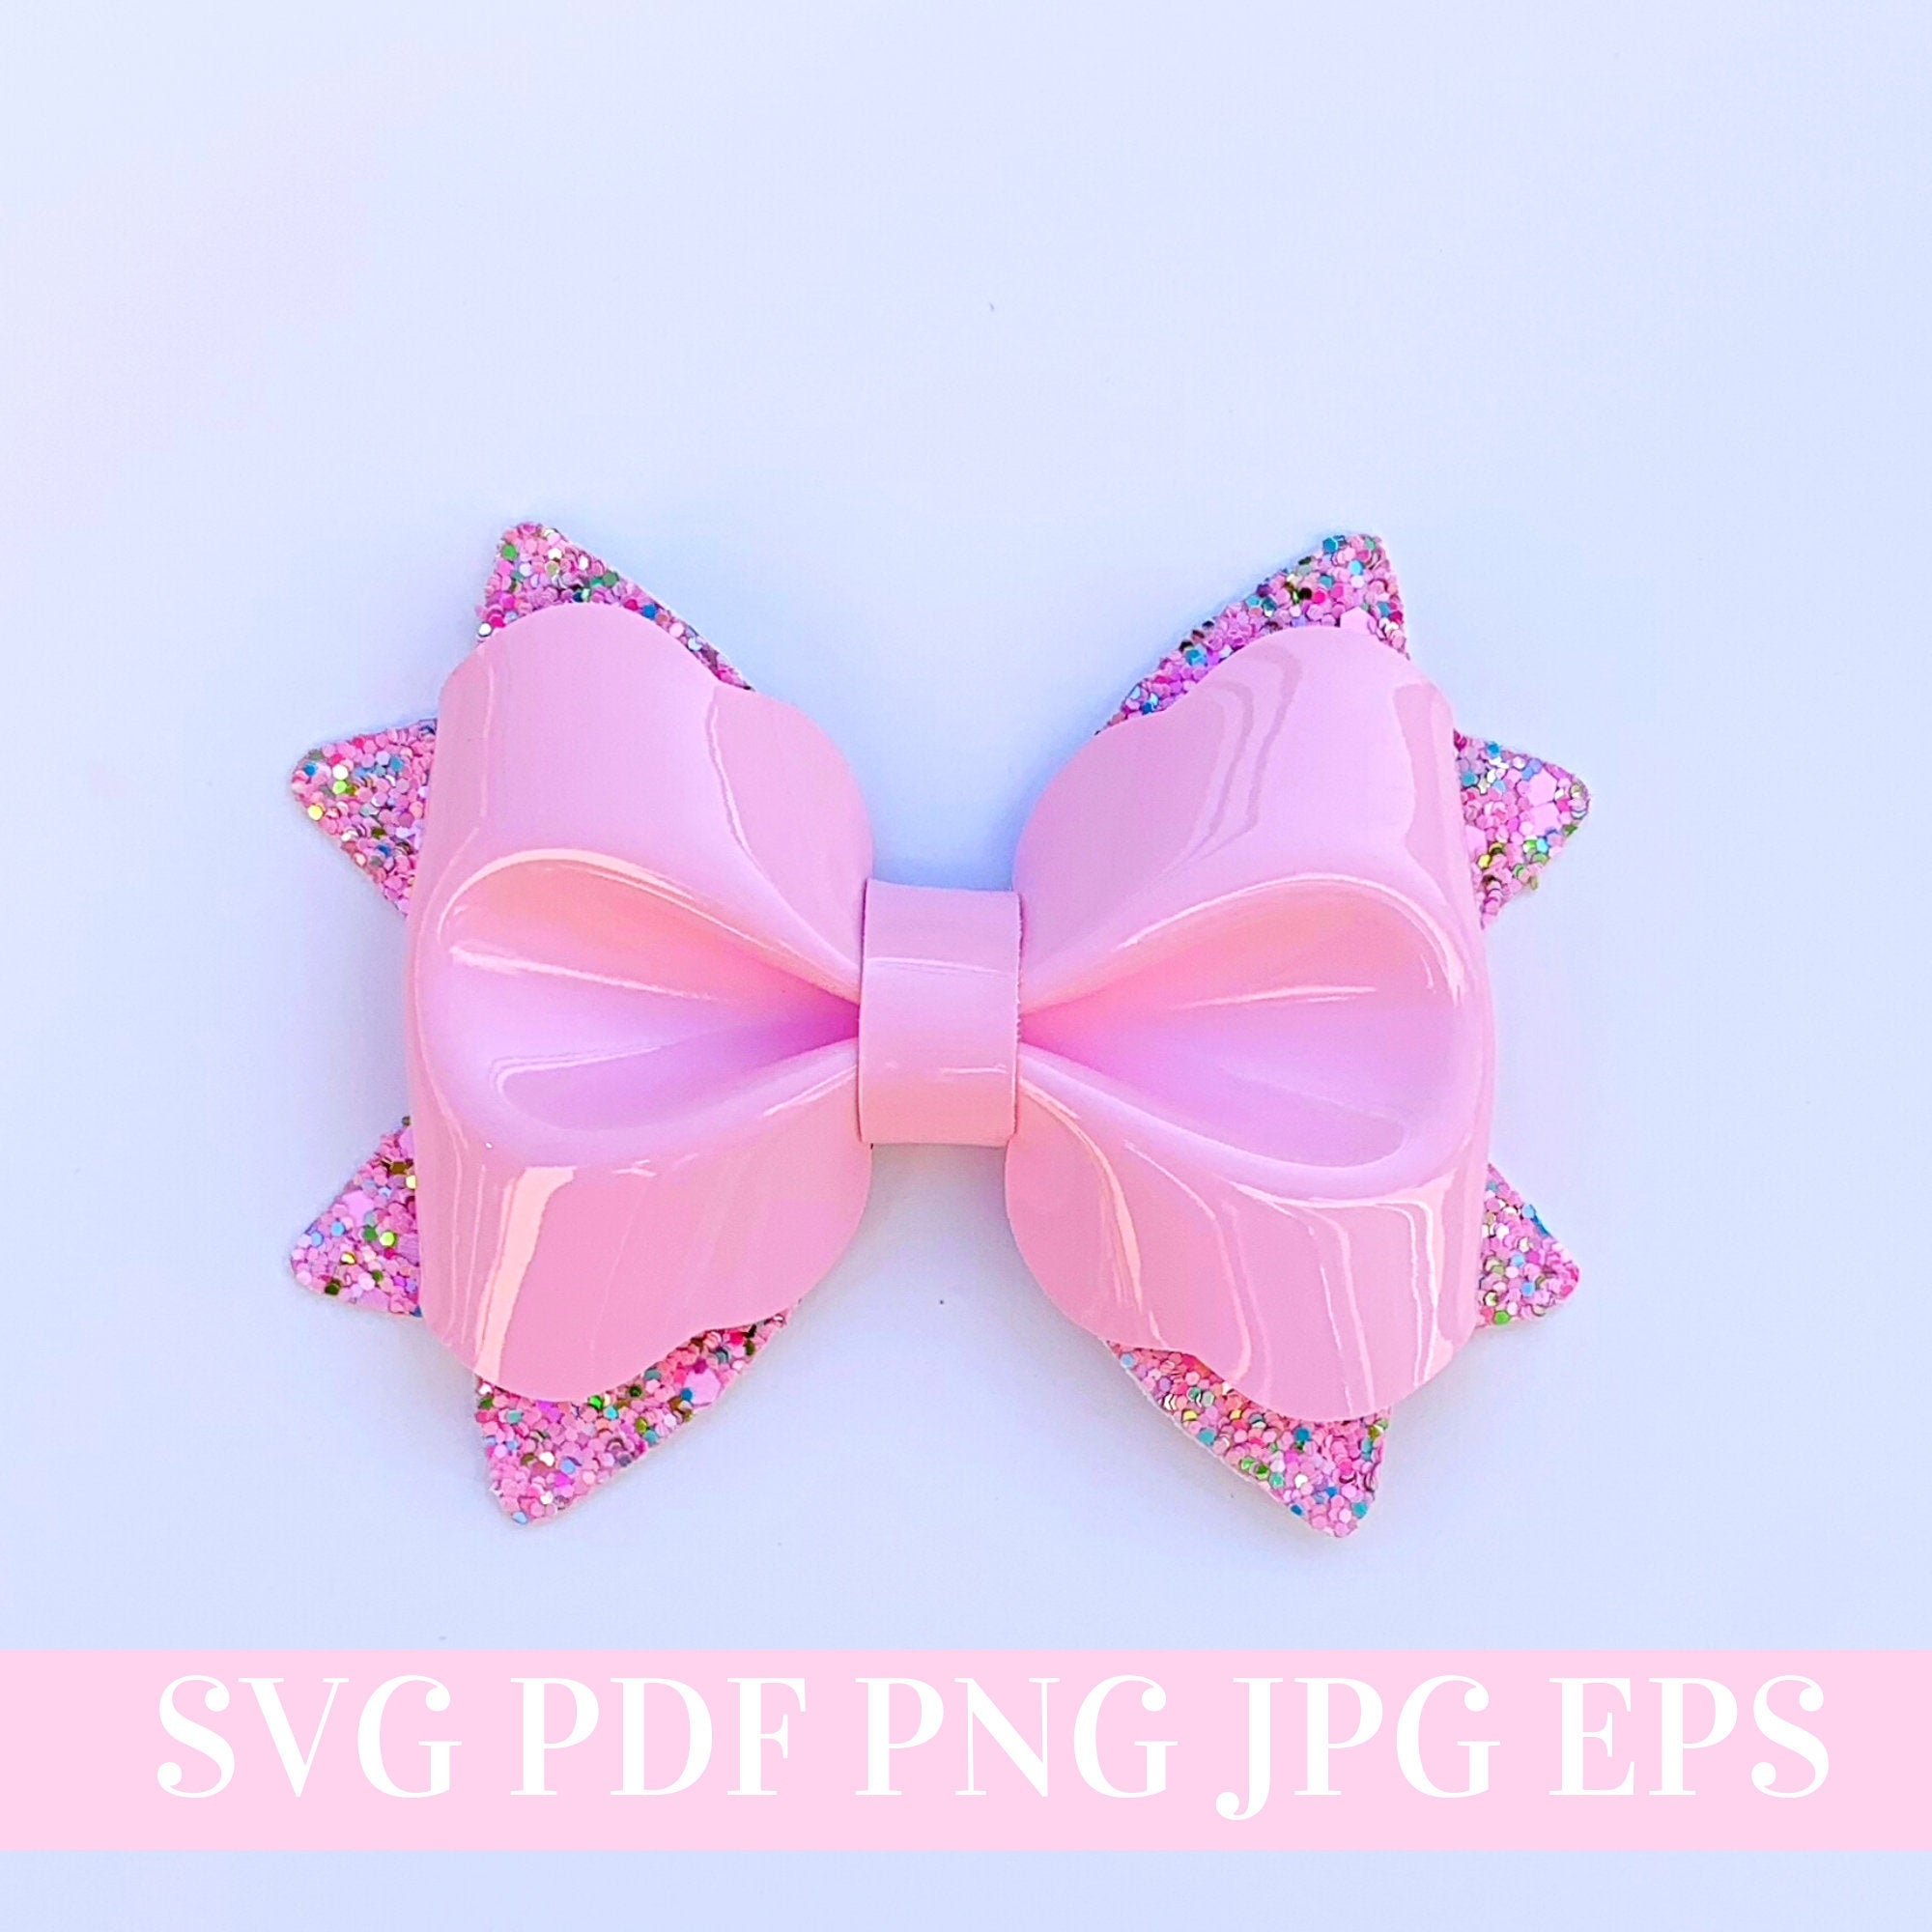 Scalloped Hair Bow Template SVG - Hair Bow SVG, PDF - Digital Template ...